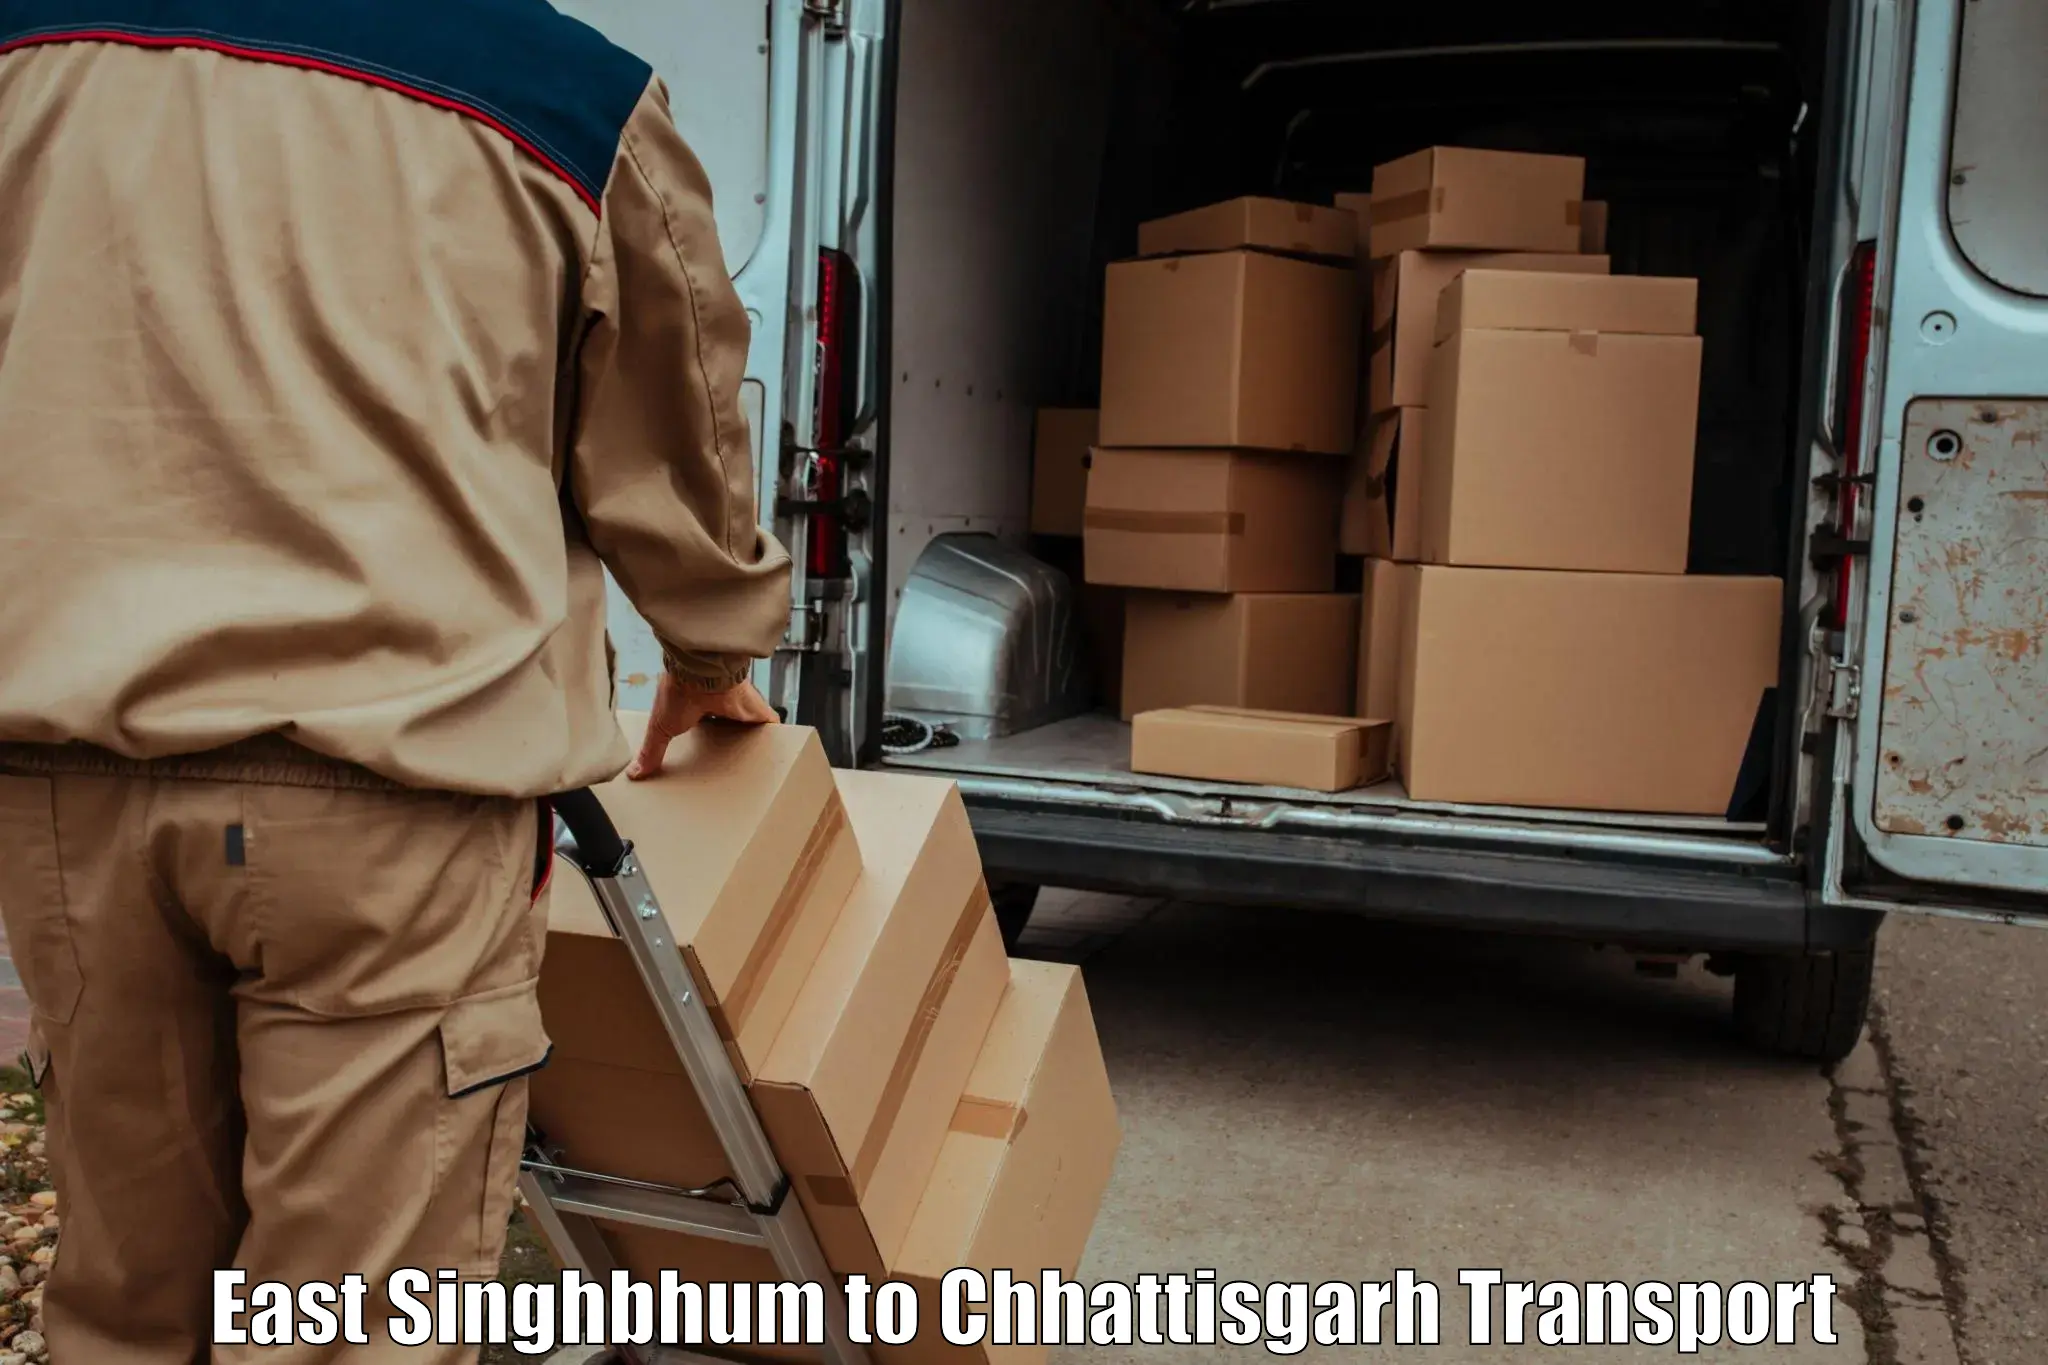 Commercial transport service East Singhbhum to Bilaspur